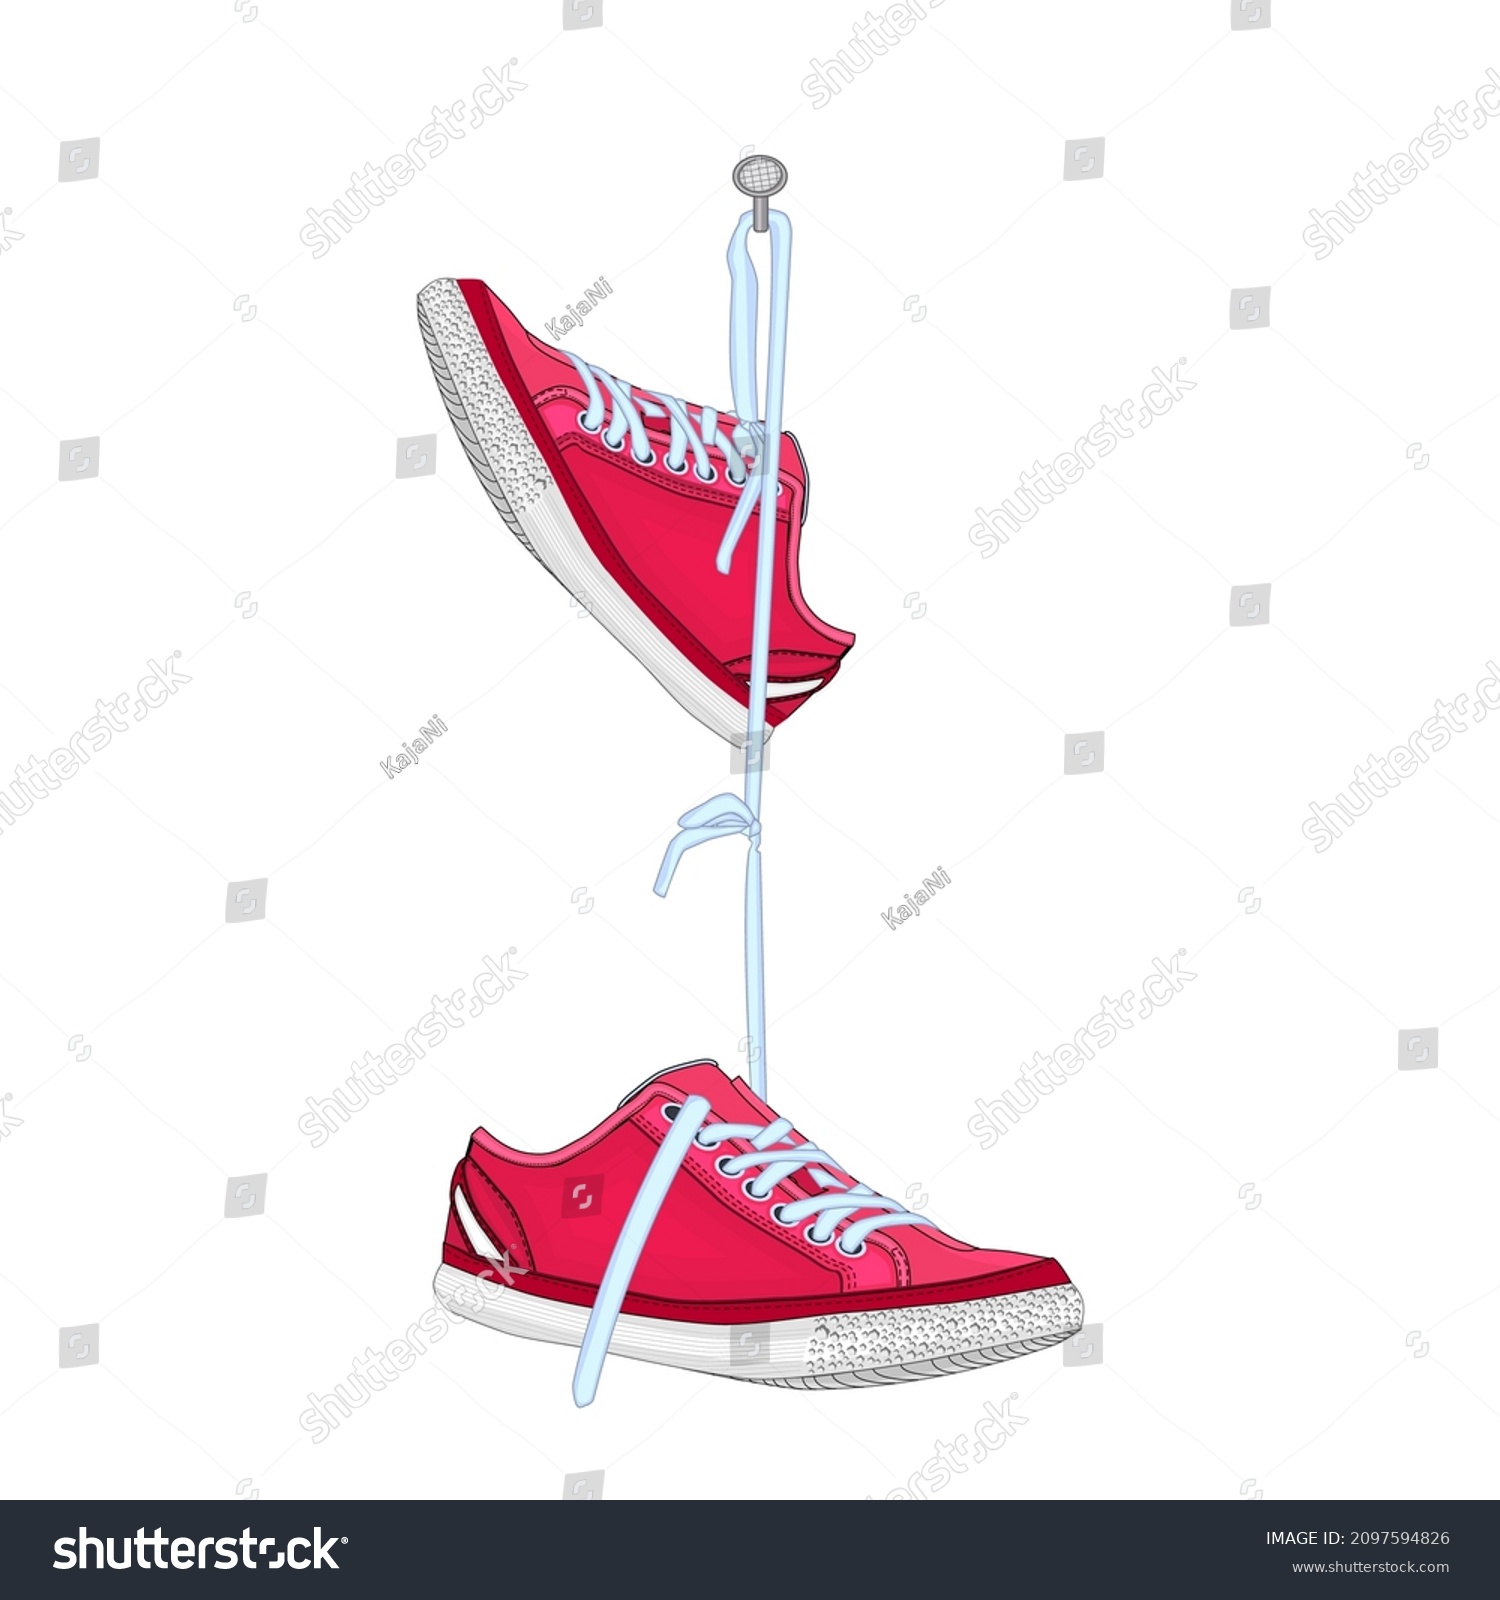 SVG of Shoes hanging on nail isolated on white background. Pair of sports footwear hang on peg.Vintage red sneakers hang on shoelace on spike. Sports and casual shoes.Shoe dangle on laces.Vector illustration svg